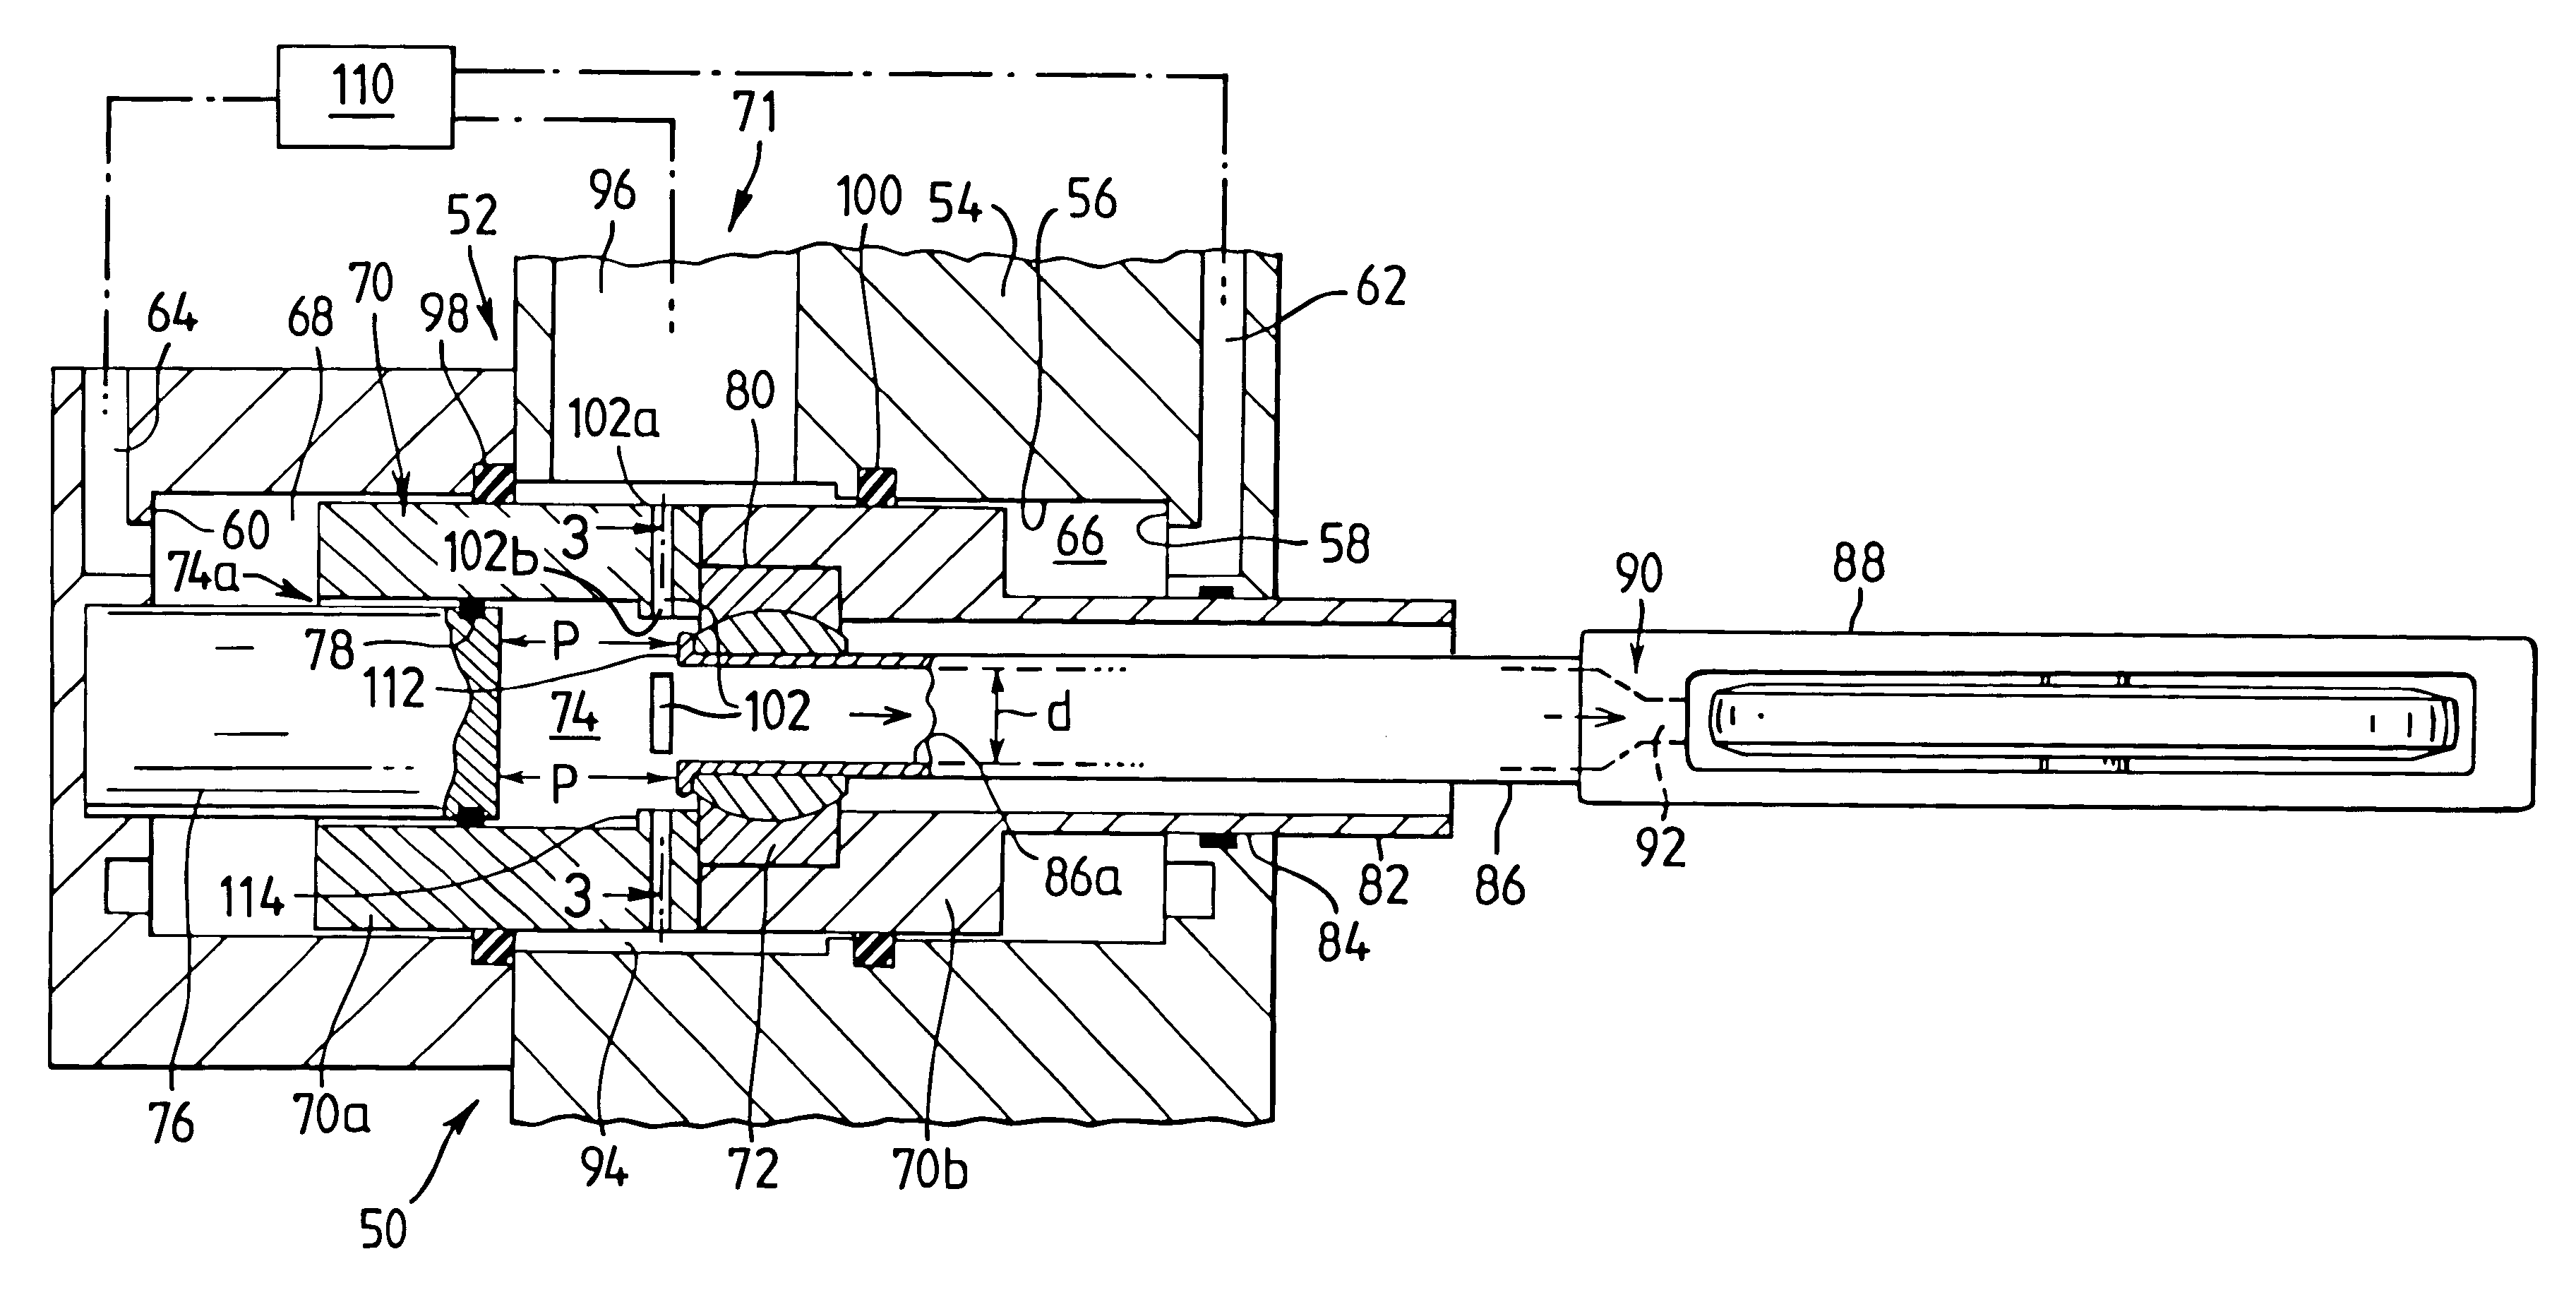 Cooling fluid supply to hydraulically actuated rollers in a continuously-variable-ratio transmission